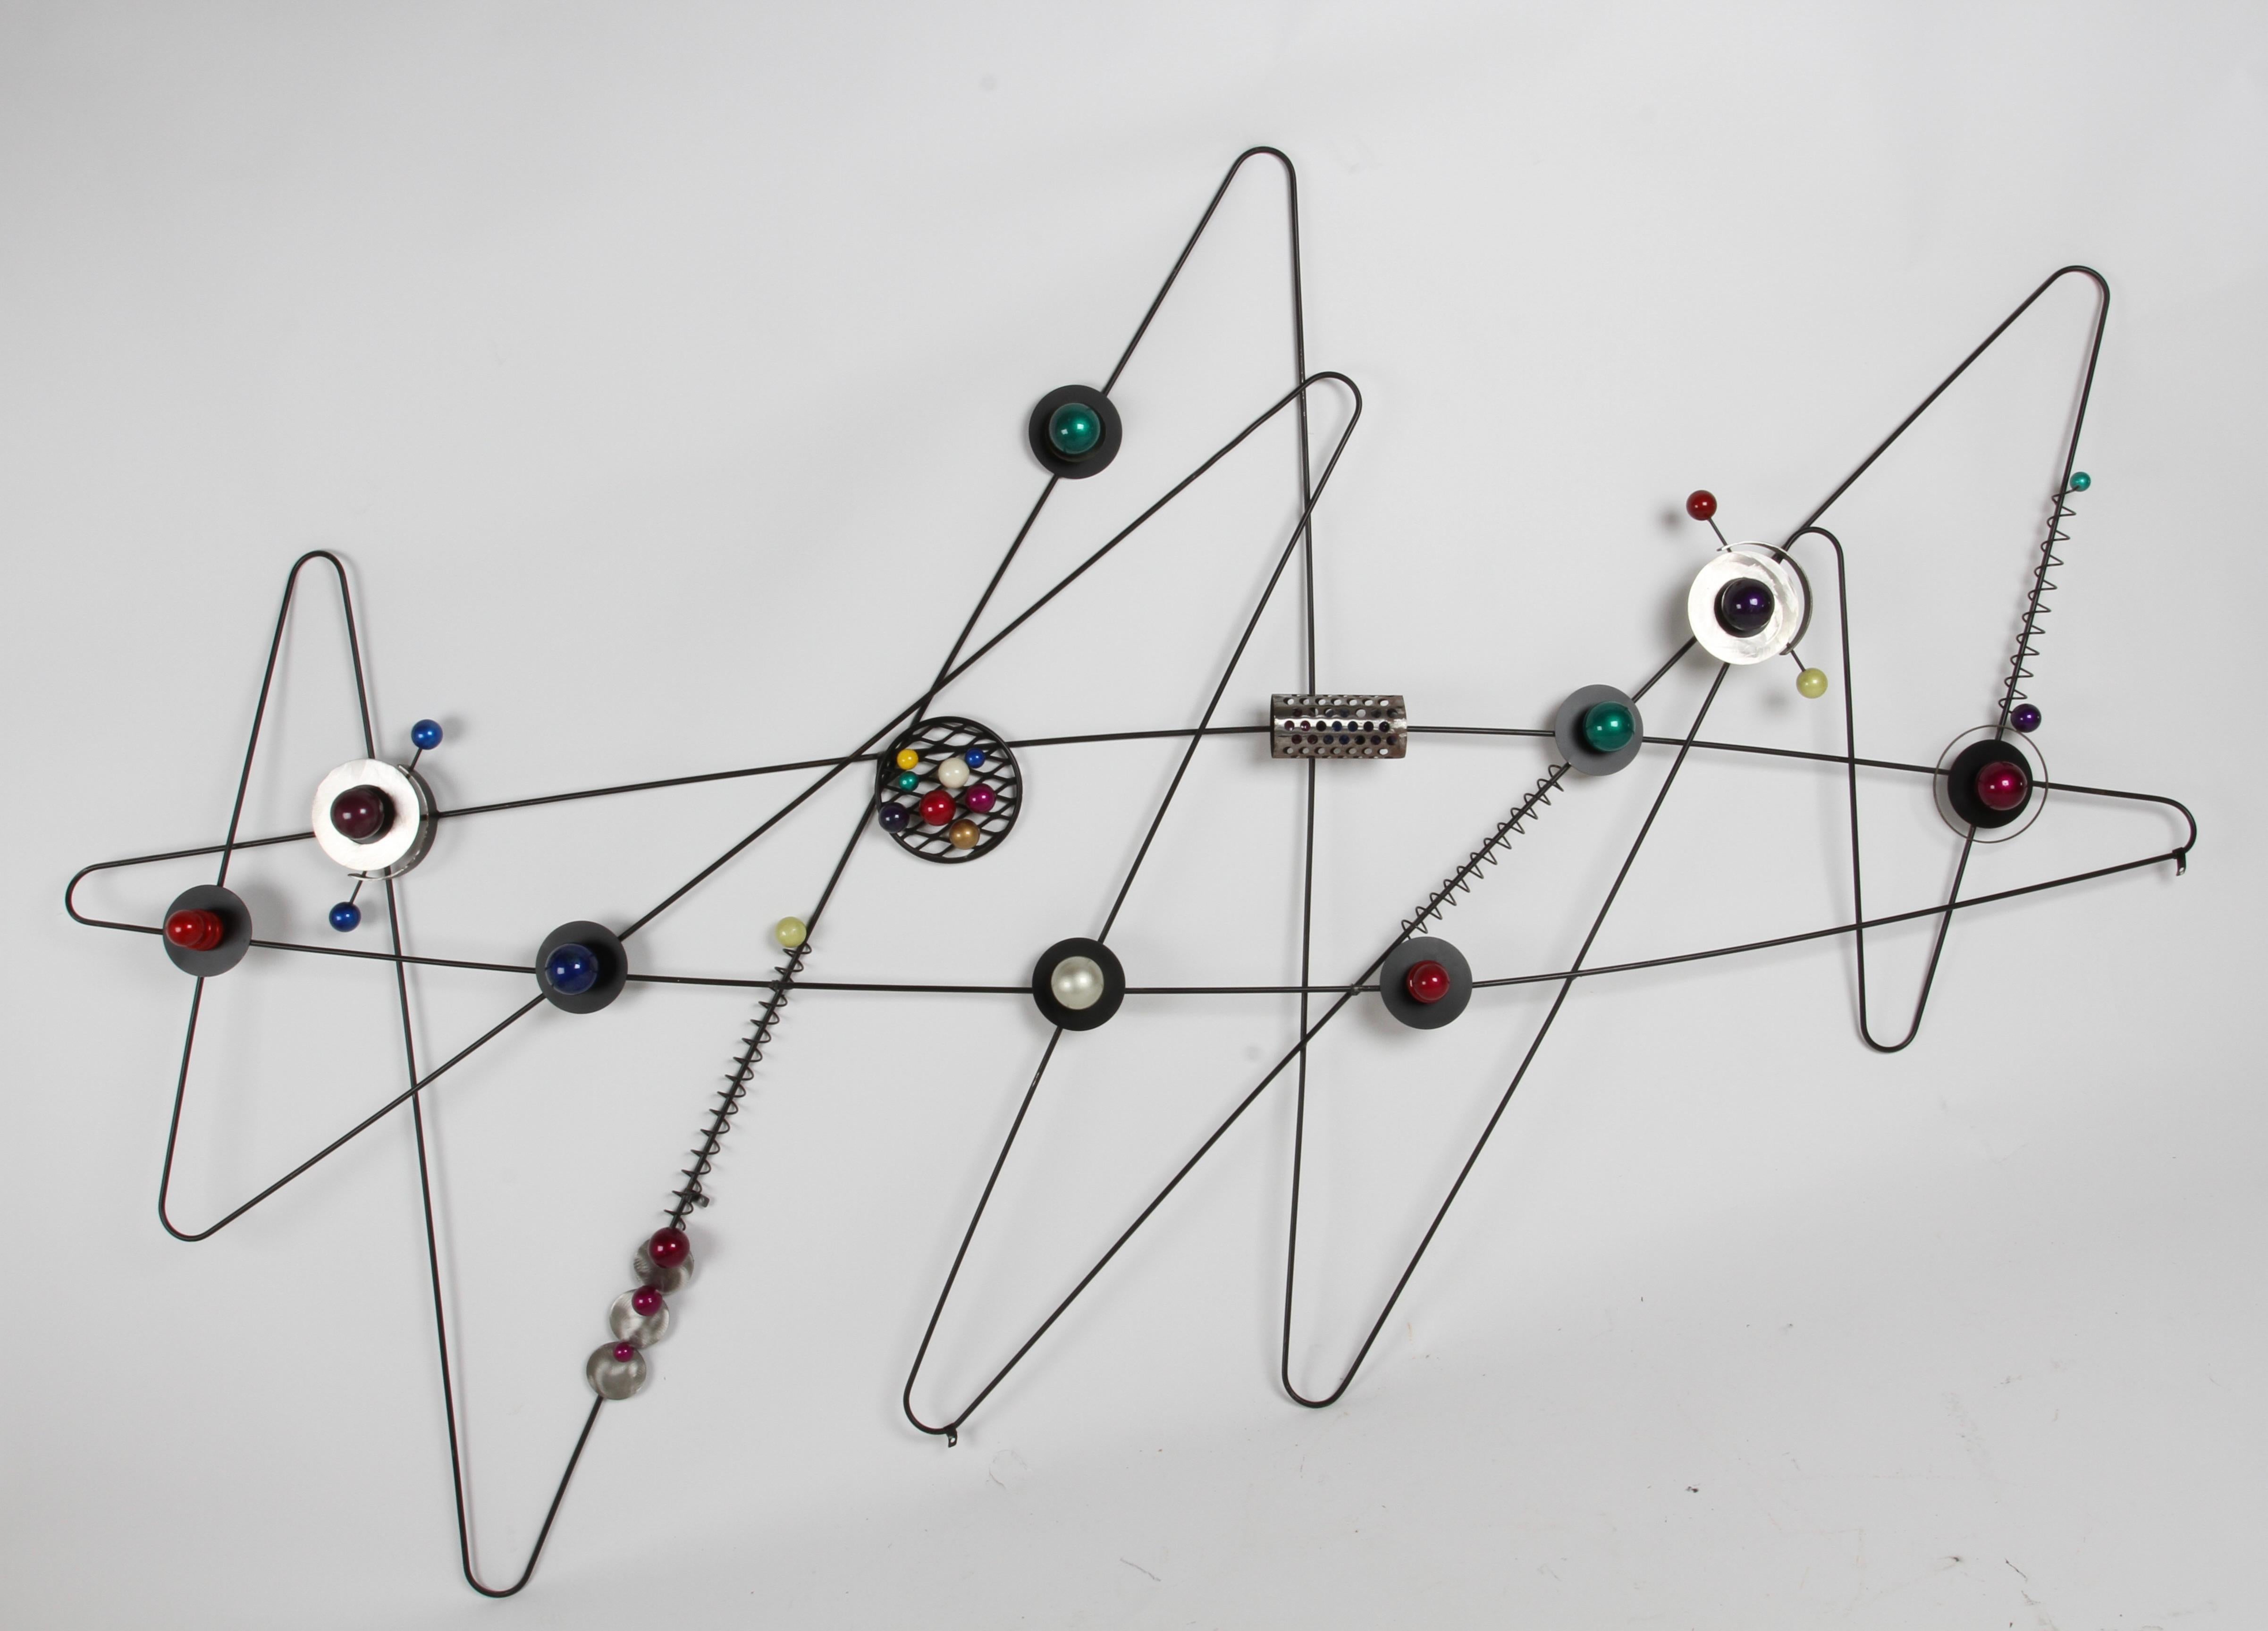 One of a kind Atomic Age large Mid-Century Modern style wall sculpture made of round black painted bent iron rod, in zig-zag form or atom rings with assorted metallic colored orbs (atoms) and brushed steel details. Circa 1980s sculpture is a perfect